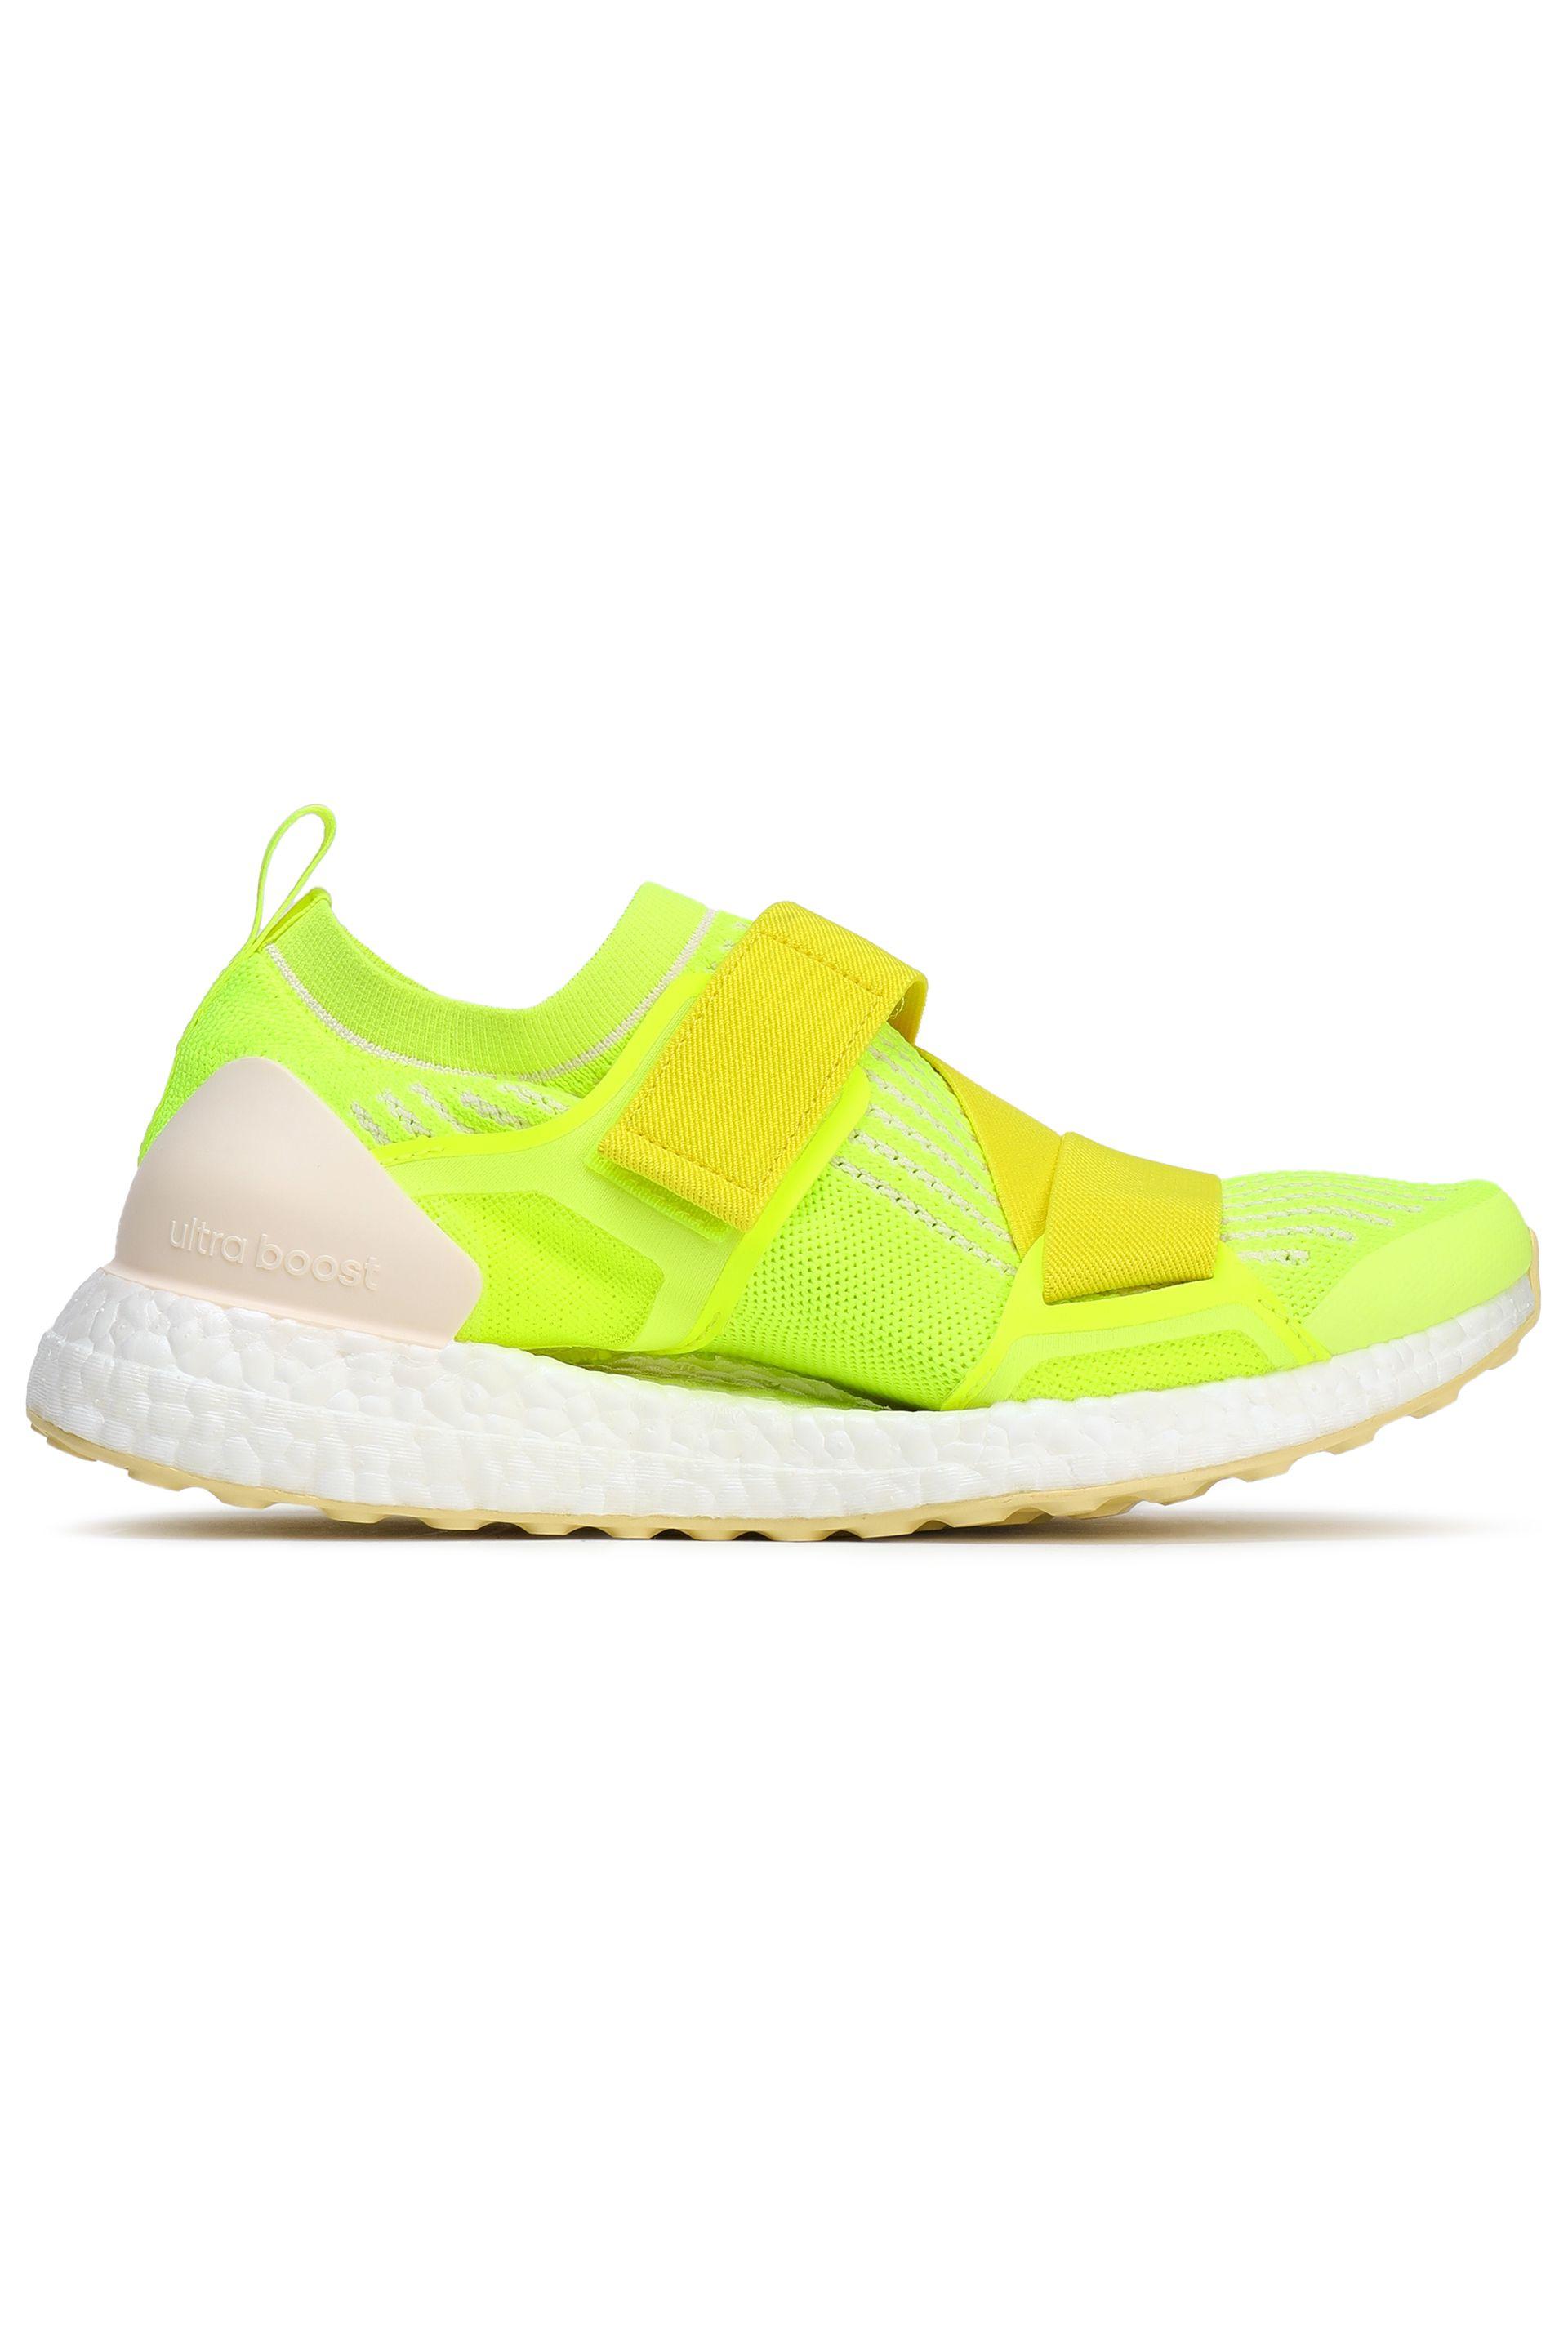 adidas By Stella McCartney Woman Neon Stretch-knit Sneakers Bright ...